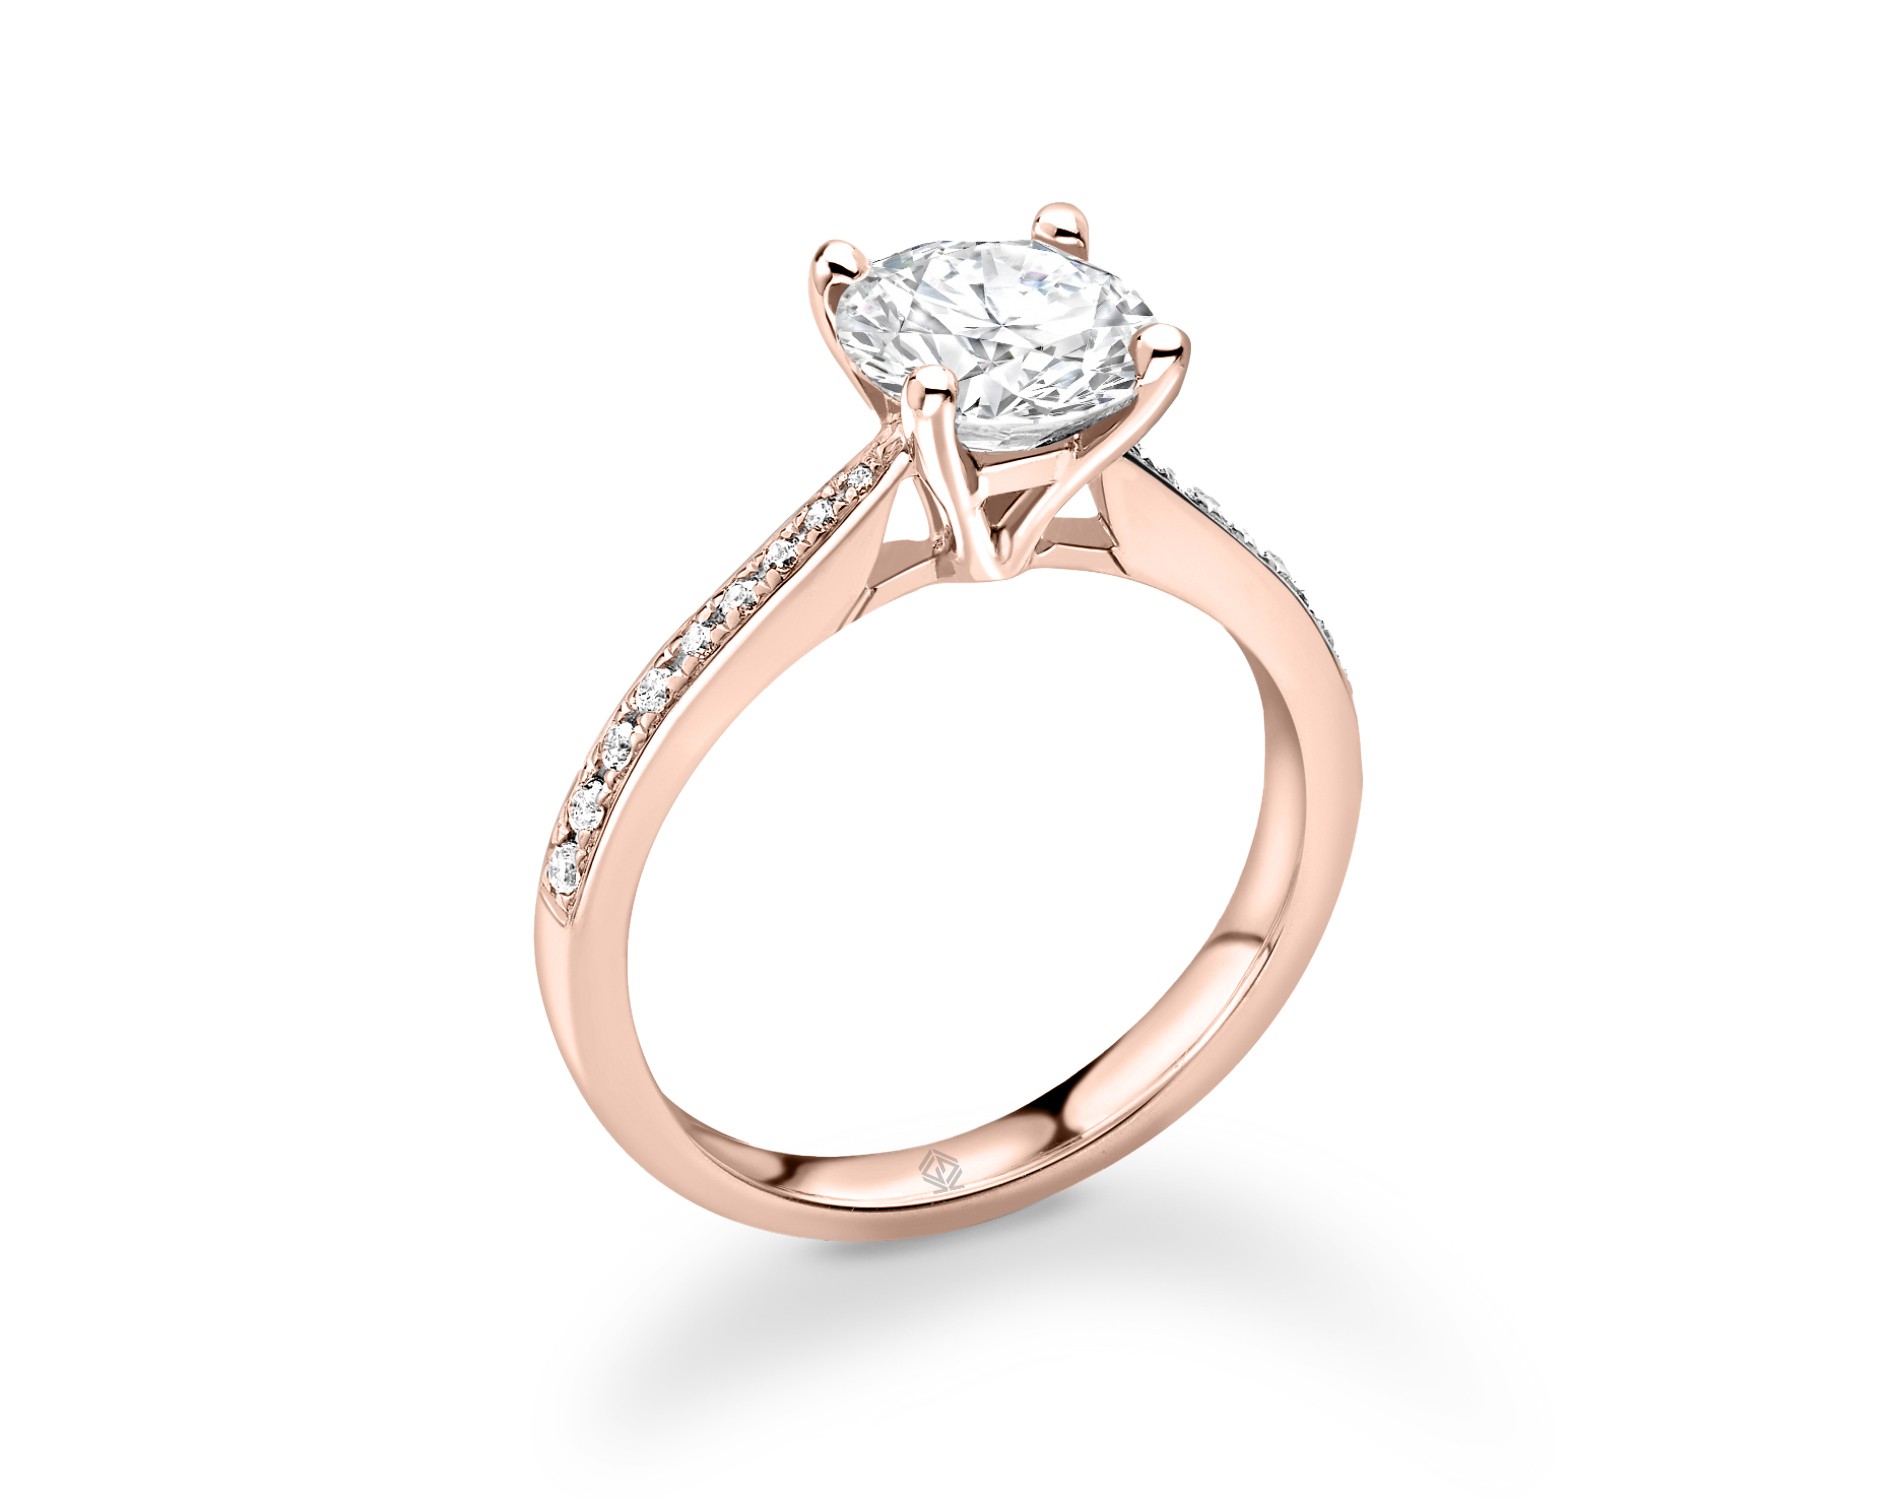 18K ROSE GOLD 4 PRONG DIAMOND ENGAGEMENT RING WITH SIDE STONES IN PRONG SET